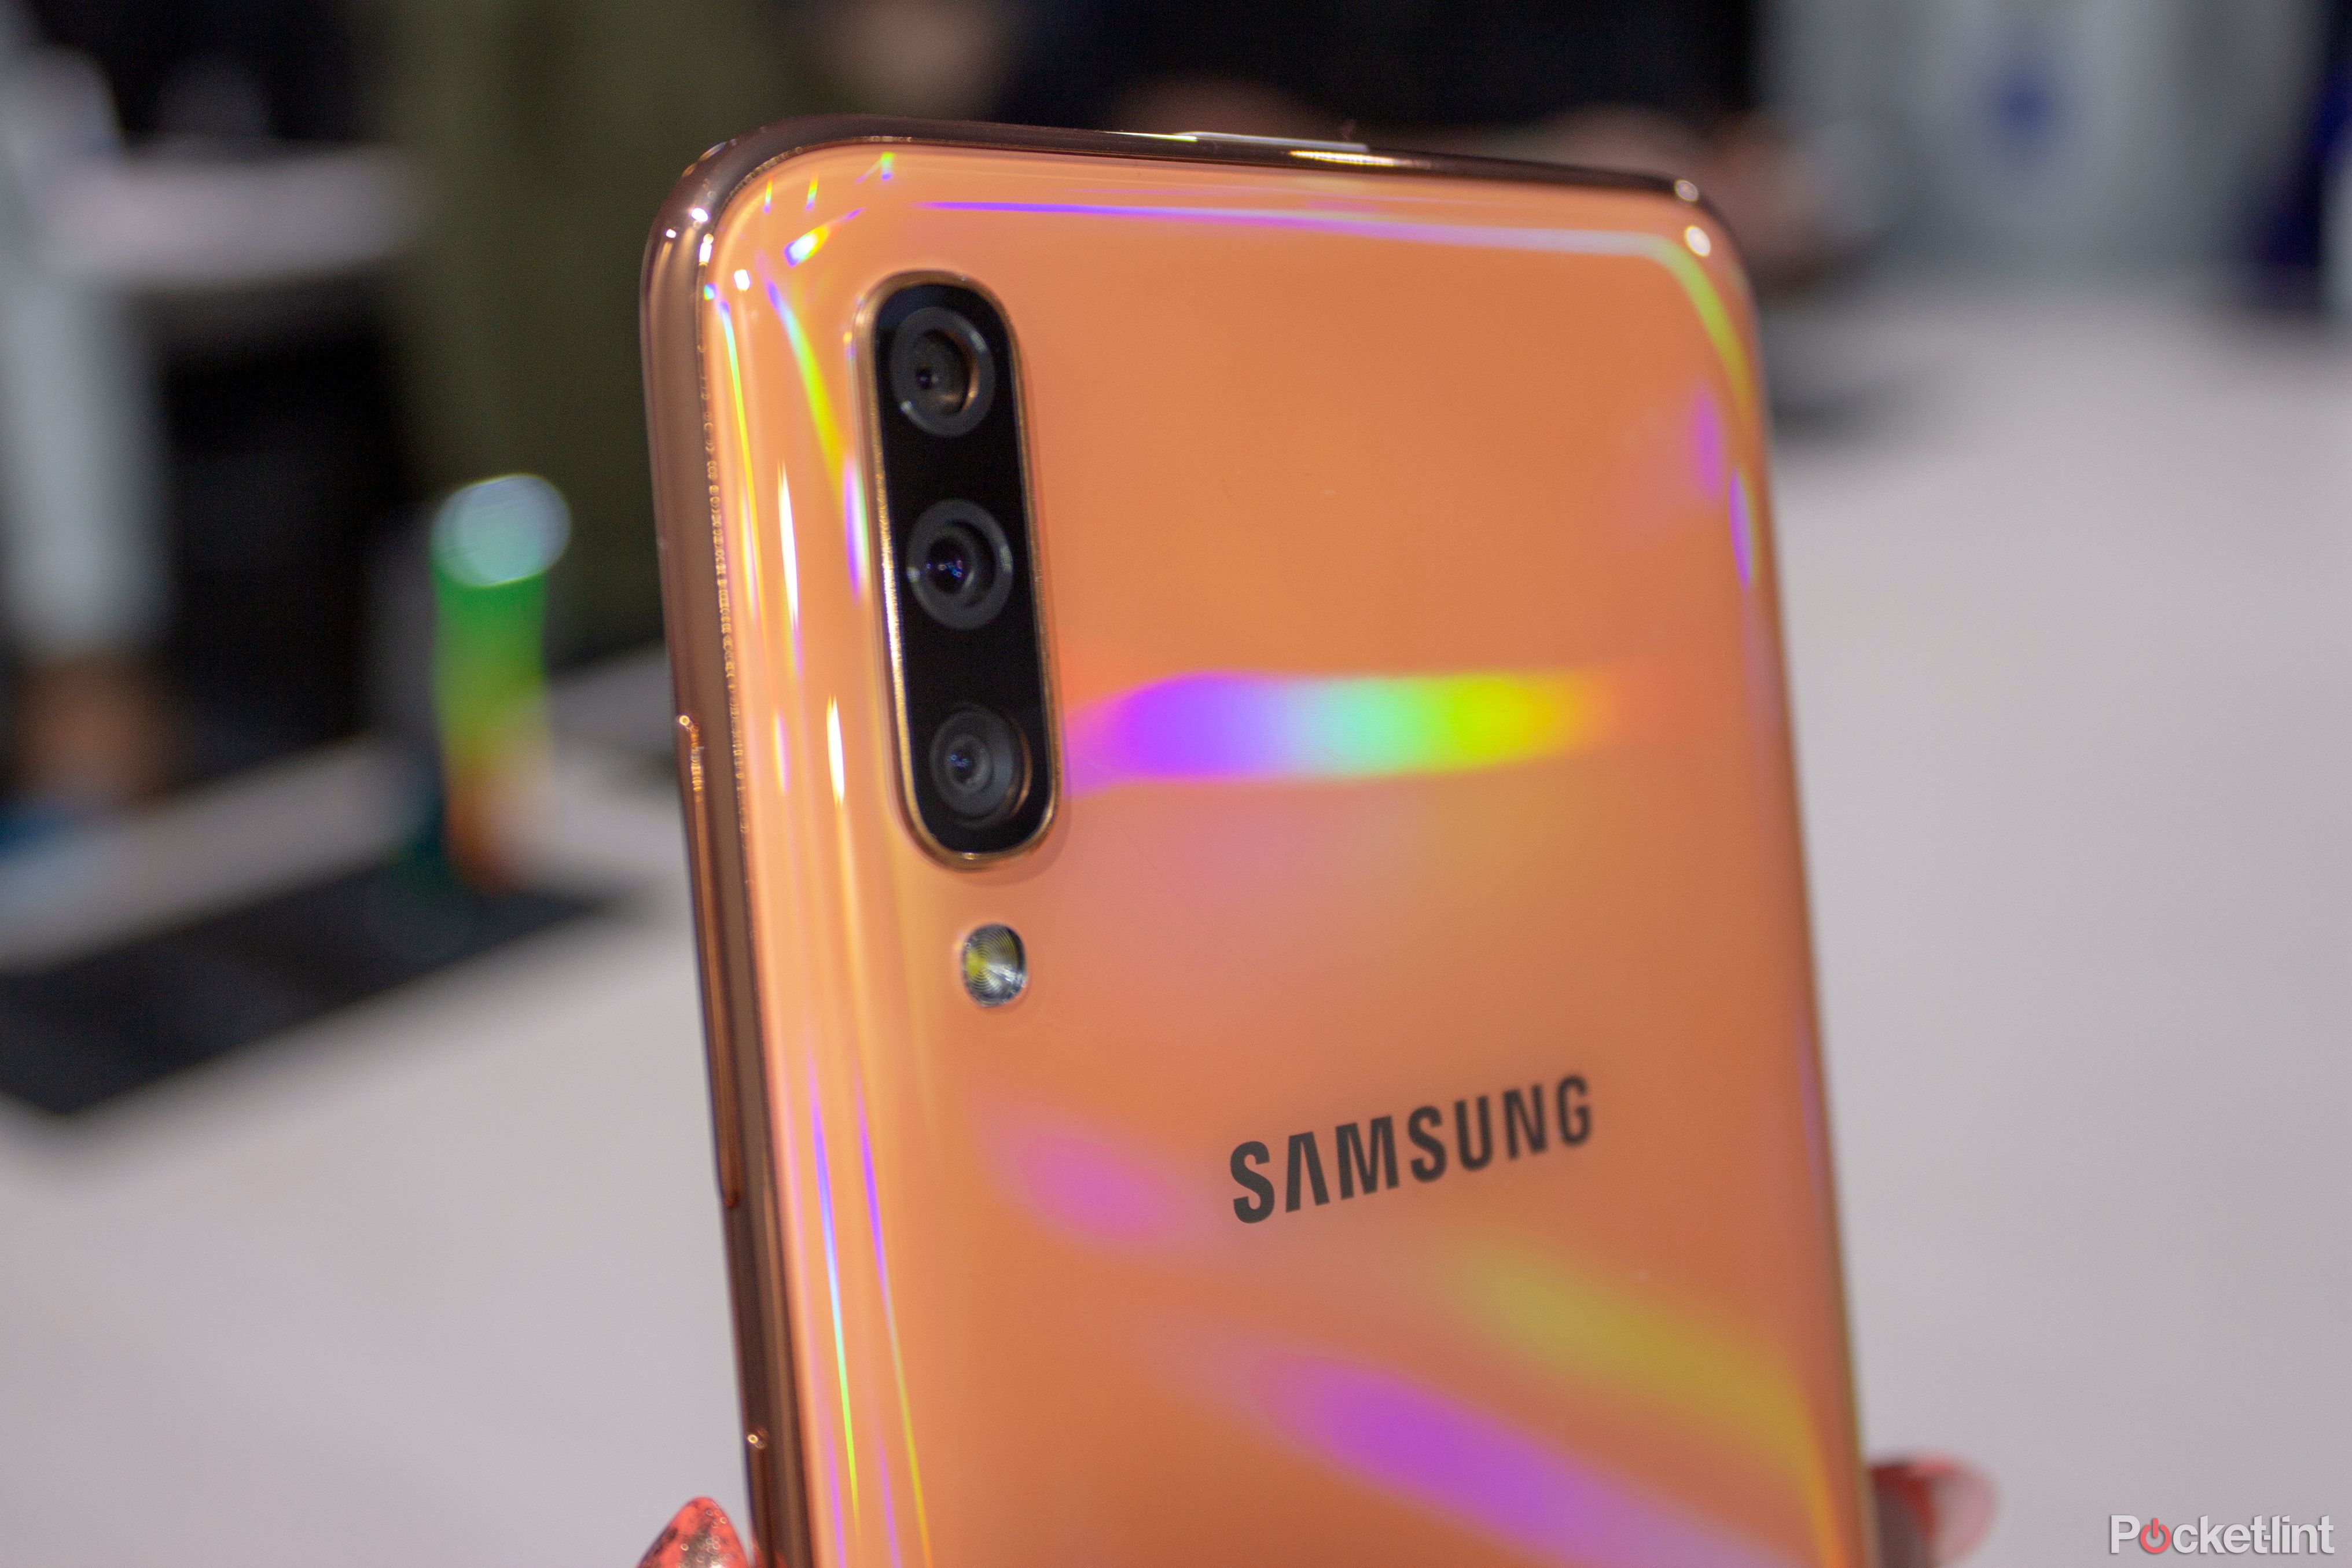 Samsung Galaxy A91 could be first smartphone to offer 108MP camera sensor in 2020 image 1